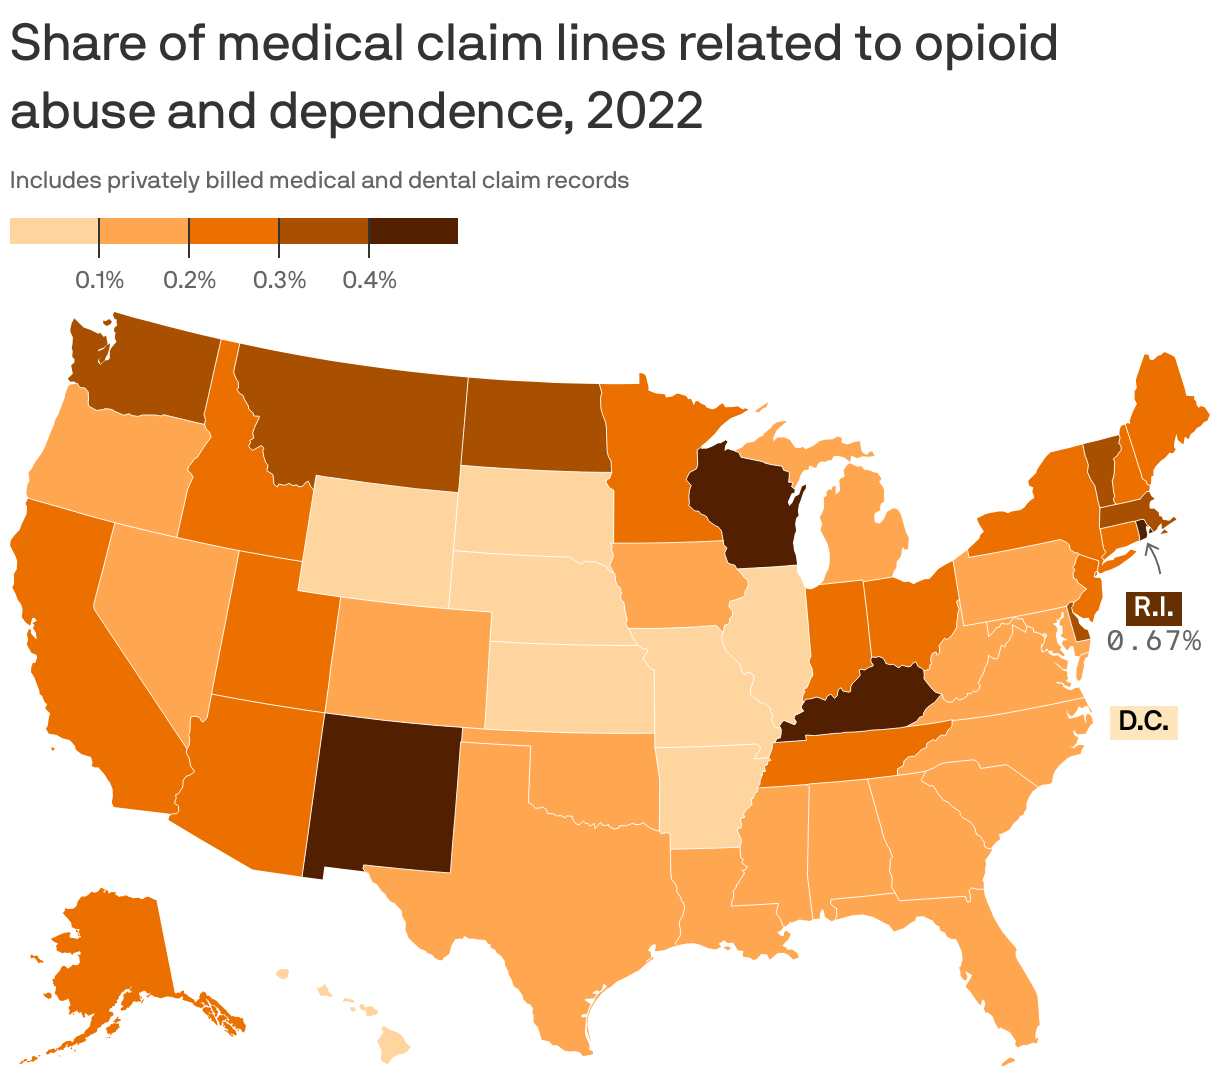 Share of medical claim lines related to opioid abuse and dependence, 2022
